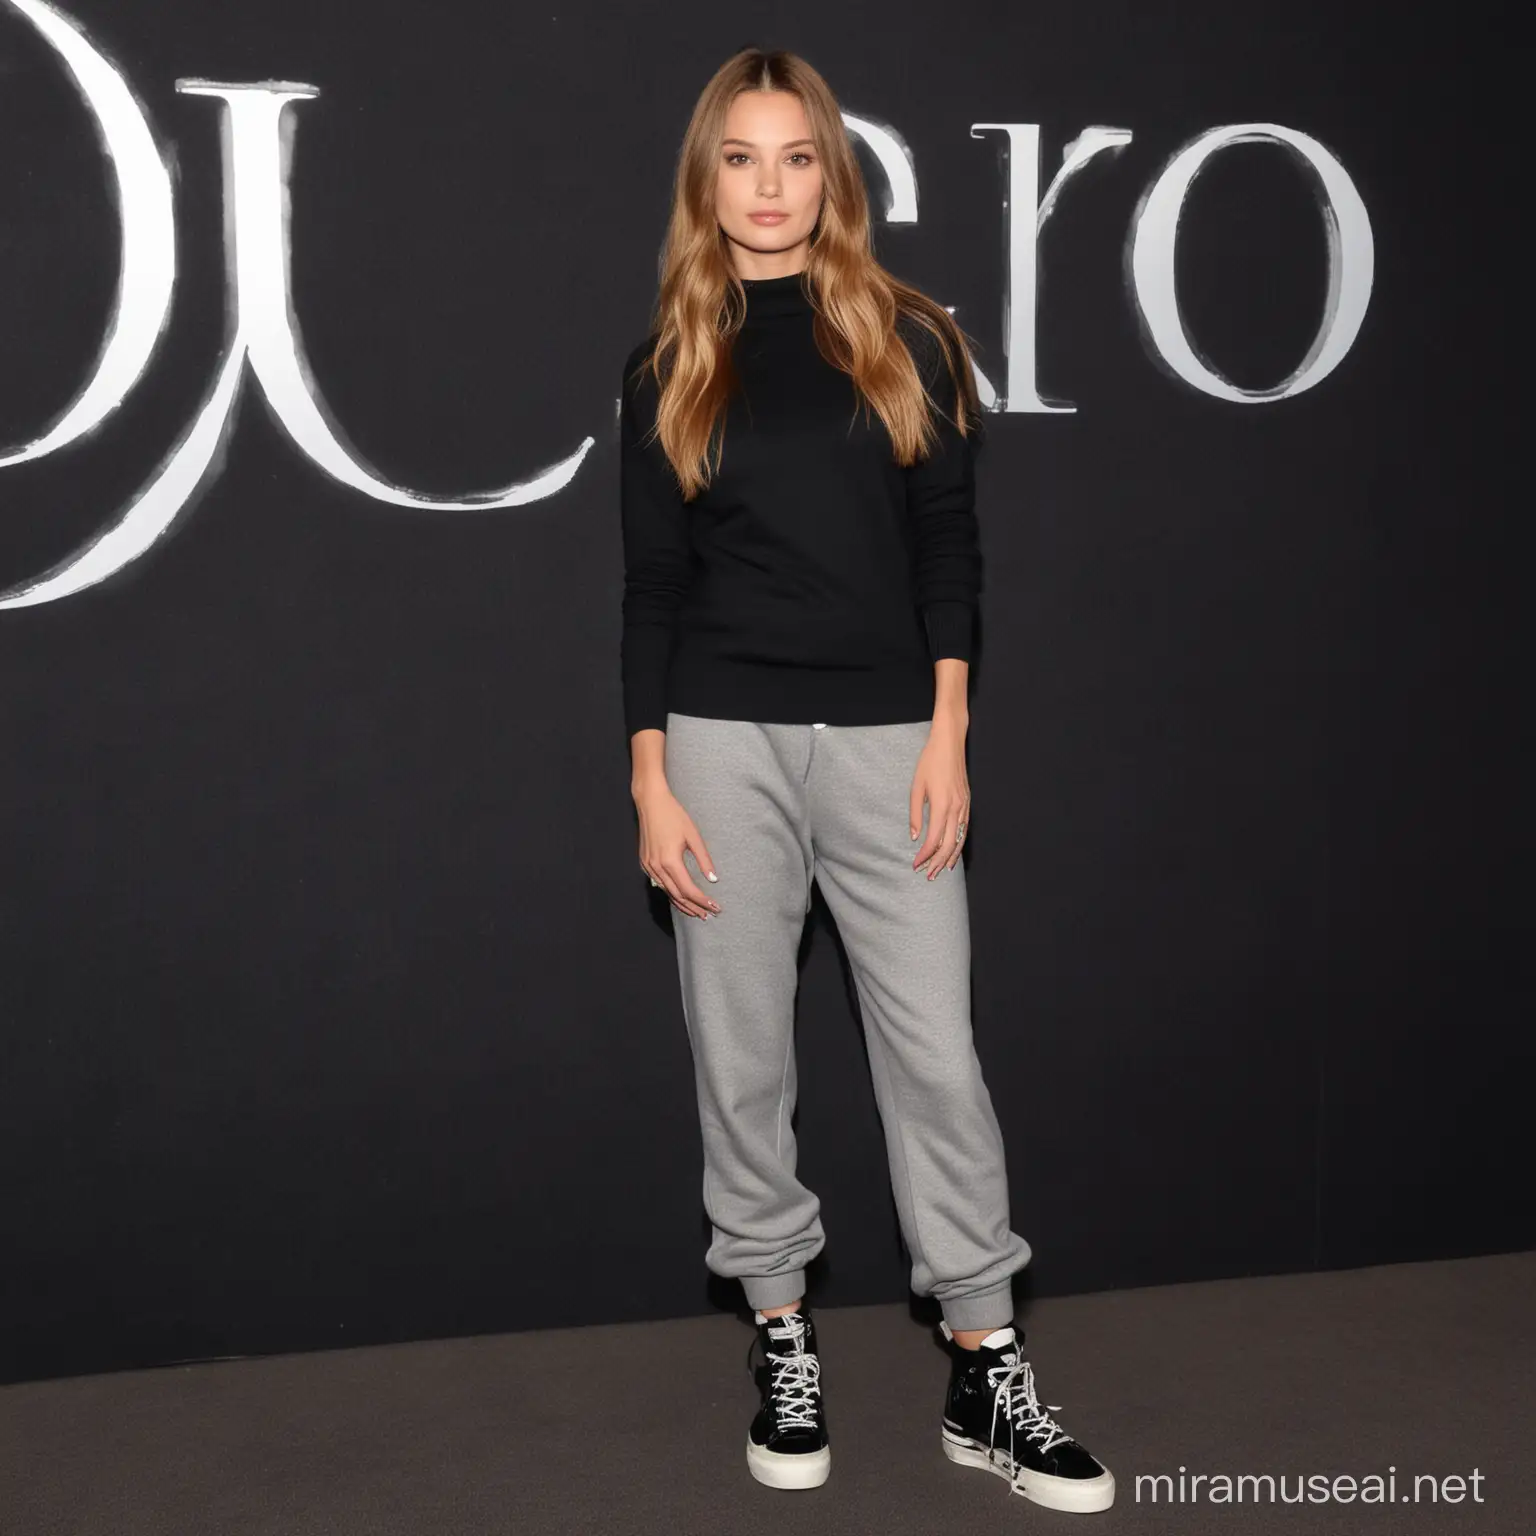 A young woman, not tall, skinny, with a small butt and small breasts, with a short neck and fingers. With long, thick light brown hair. Dressed in a stretched gray sweater and black wide trousers and sneakers on her feet. Standing on the black carpet at an event from Dior 